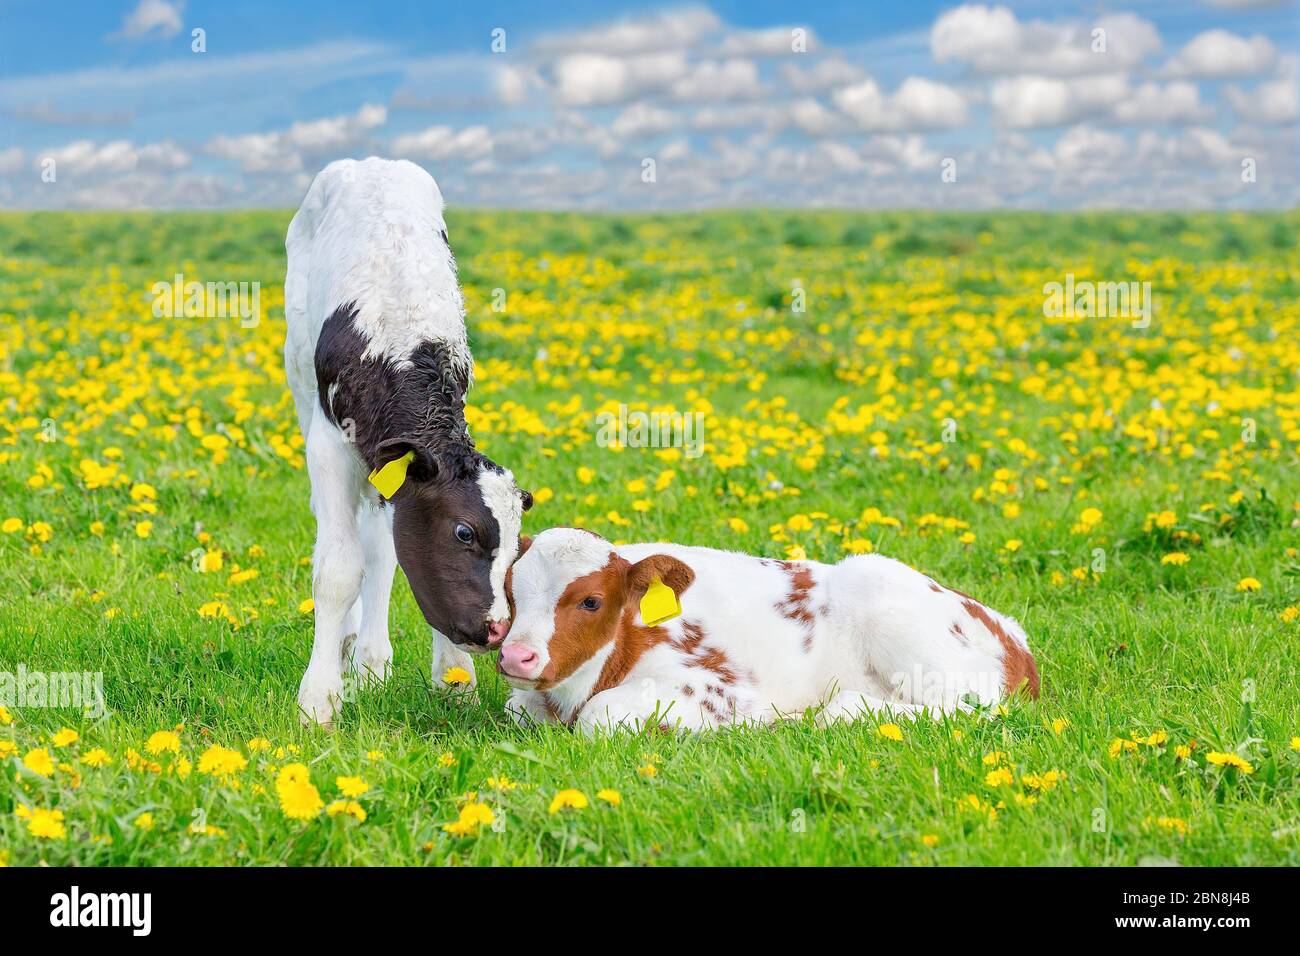 Two newborn calves together in blooming pasture Stock Photo